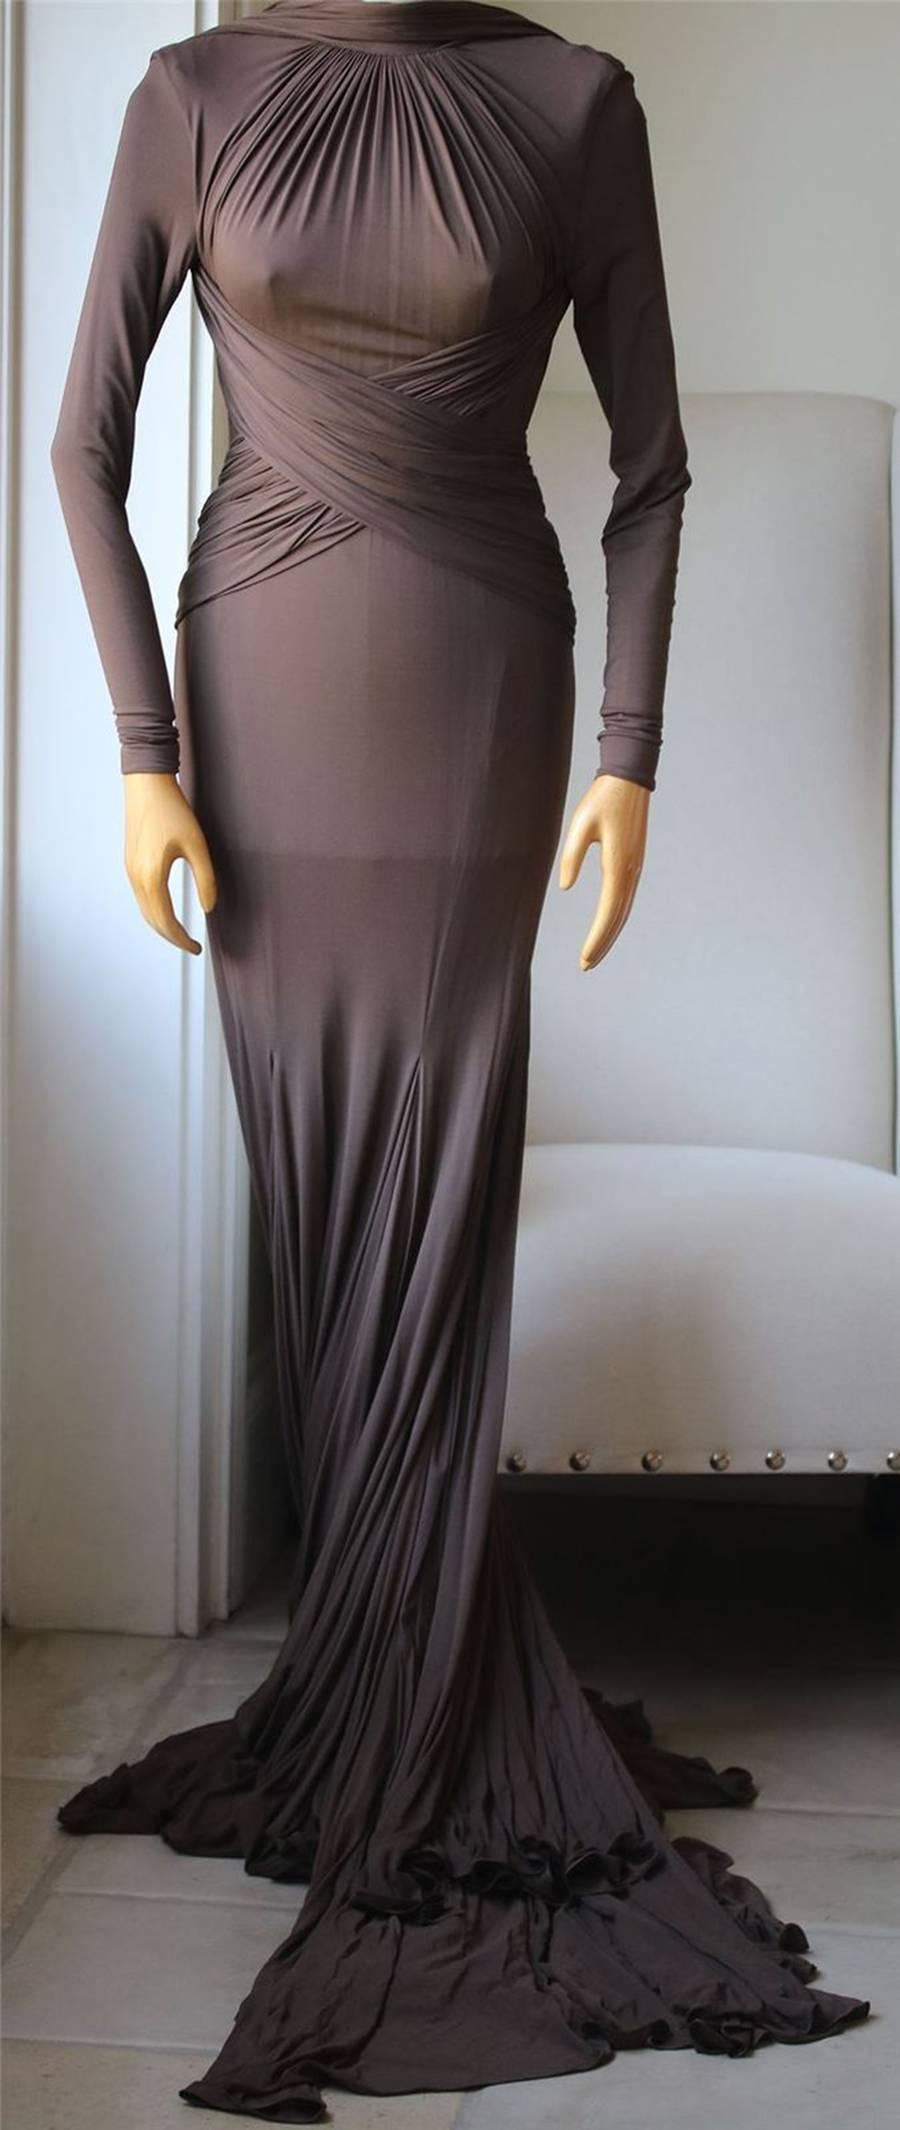 Guy Laroche by Herve L. Leroux brown long-sleeved backless gown. The simplicity of Guy Larouche's gown is what sets it apart from your average evening gown. Hilary Swank thought so too when she wore the same dress in navy to recieve her Oscar in